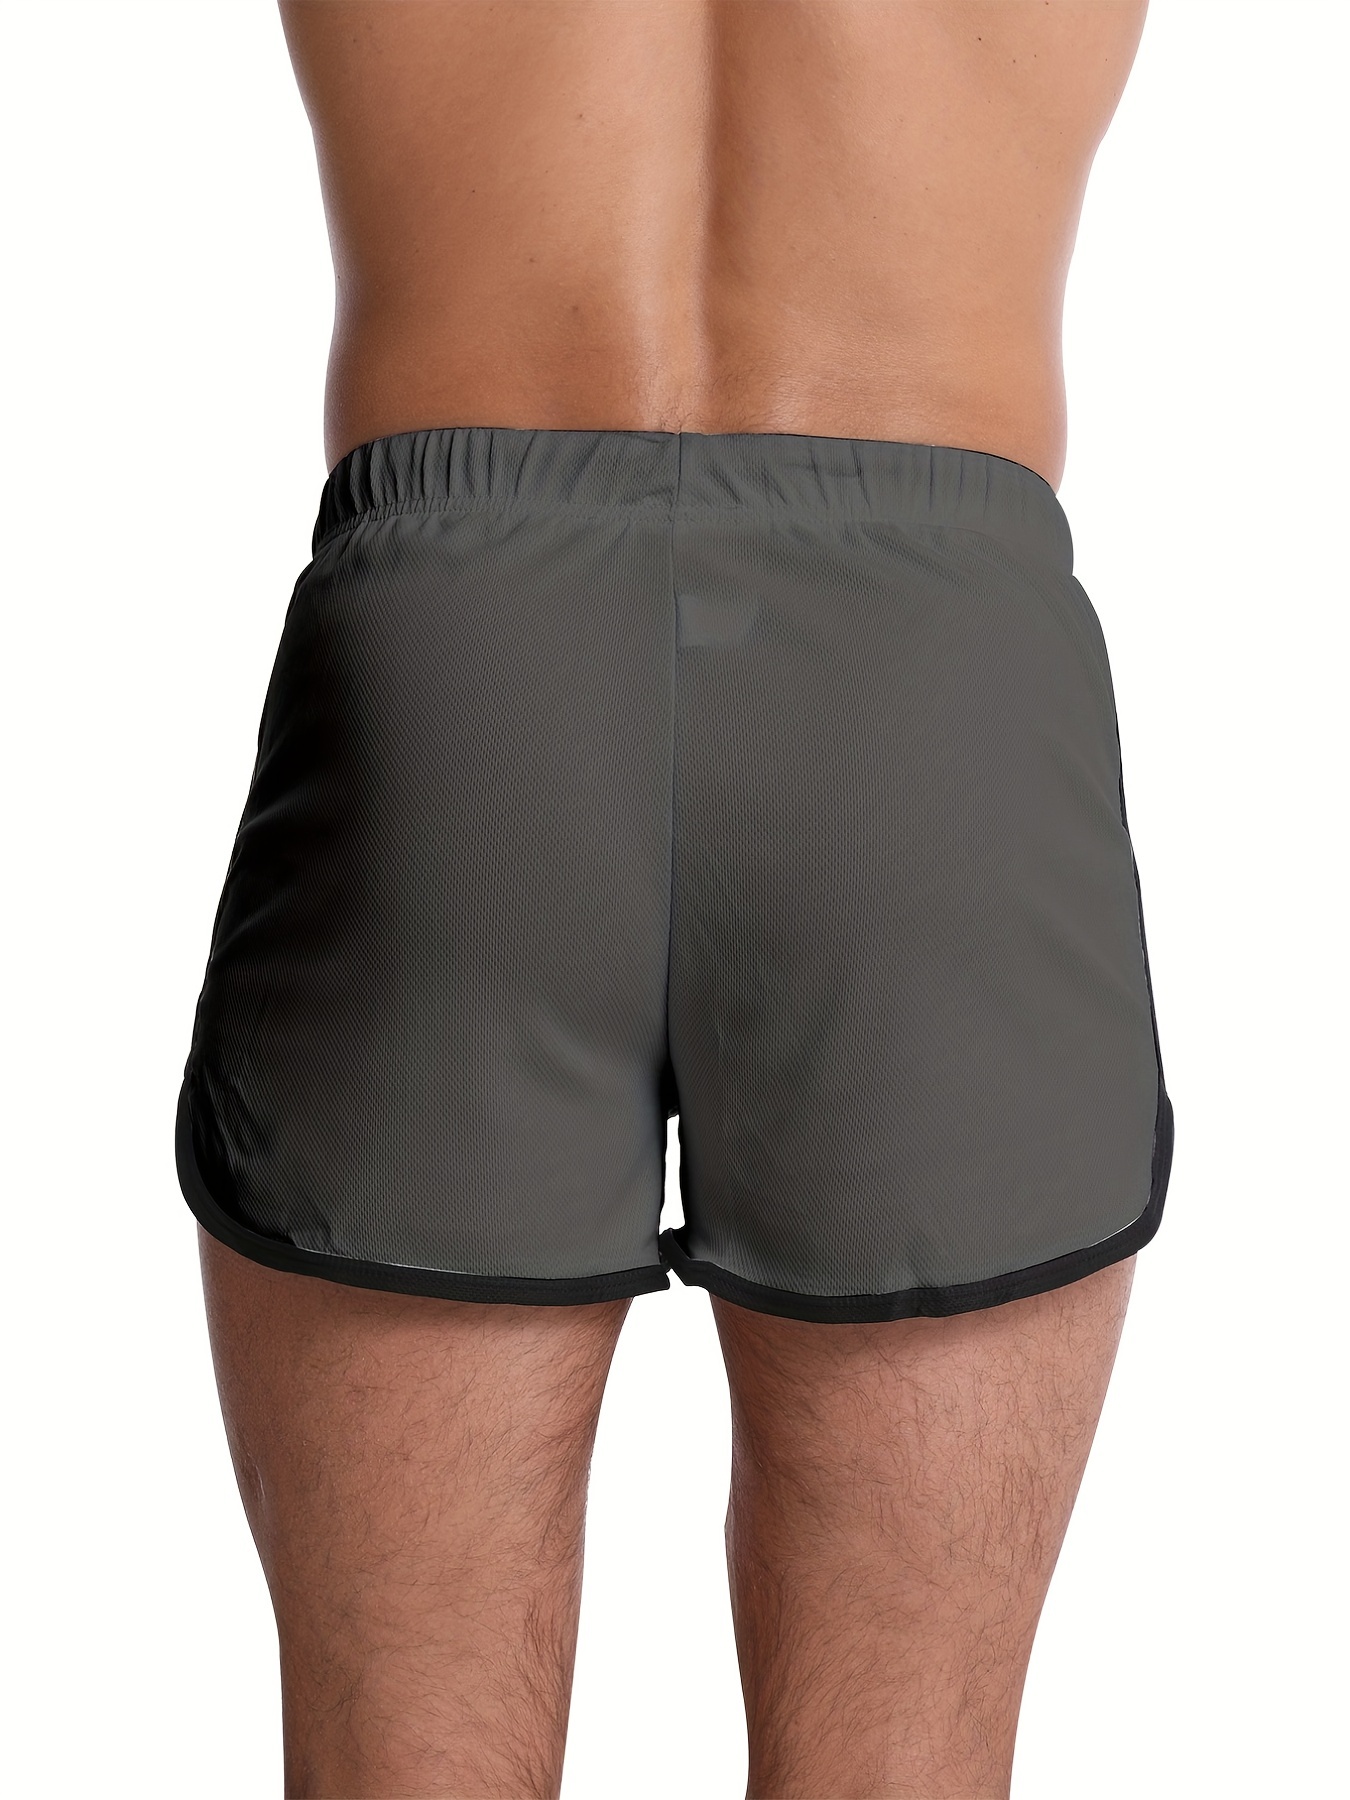 YWDJ Cute Athletic Shorts for Men Quick Dry Athletic Shorts